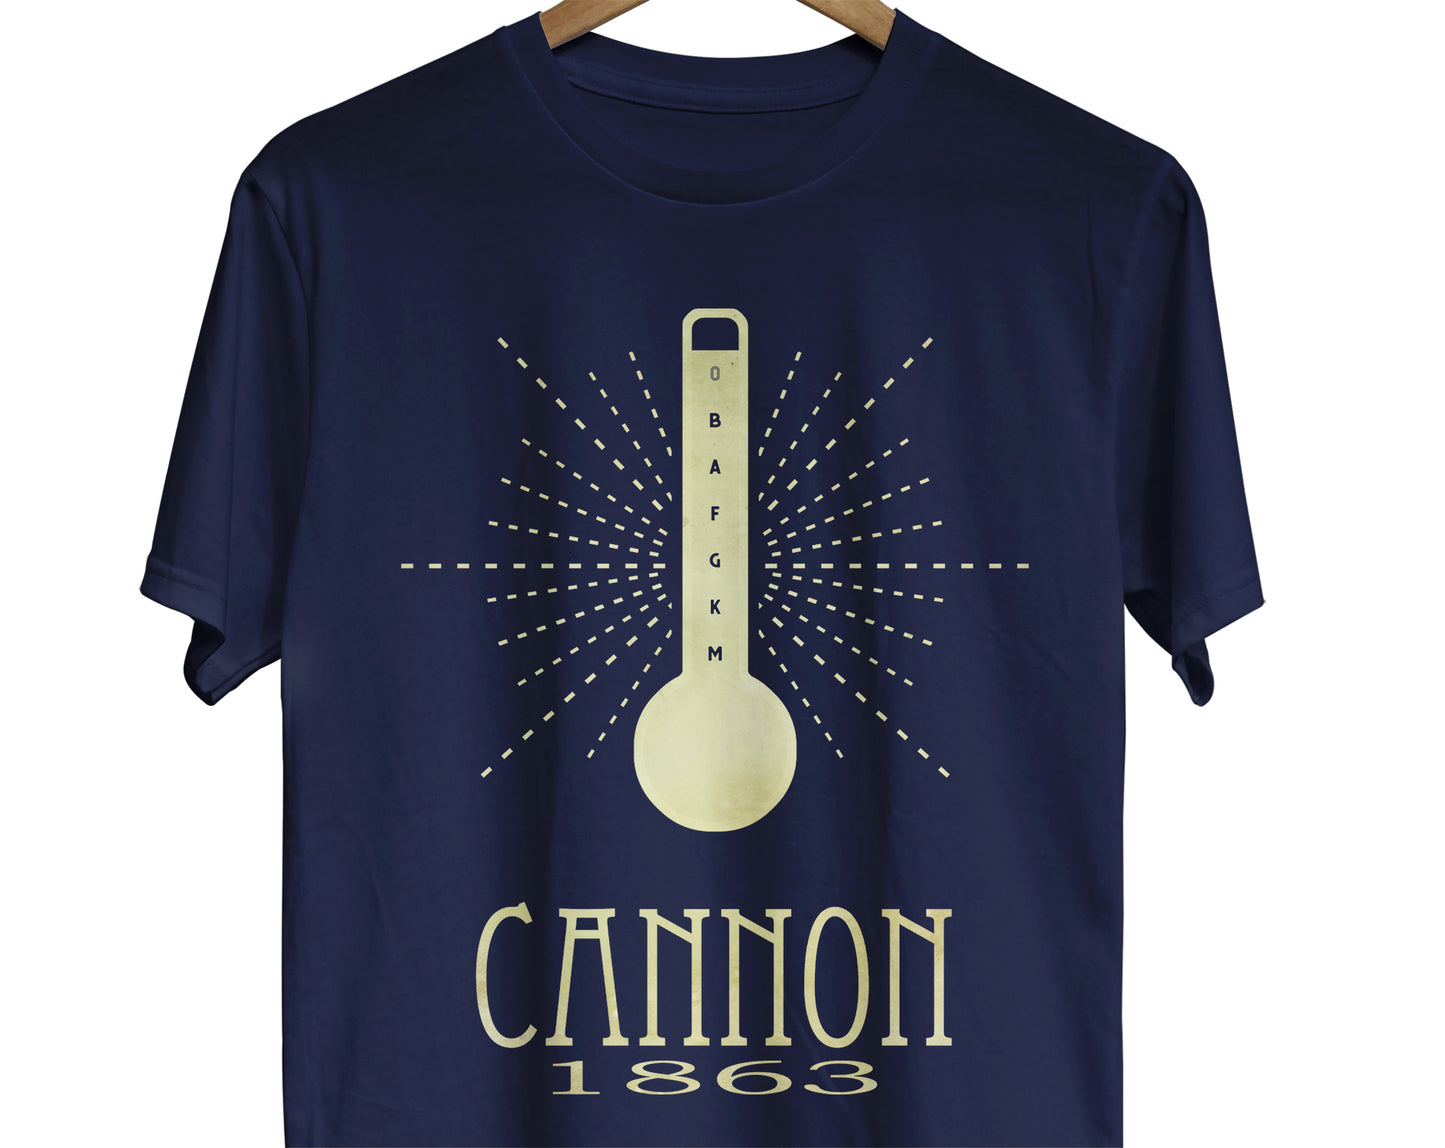 Cannon Astronomy T-shirt, Star Classification Graphic Tee